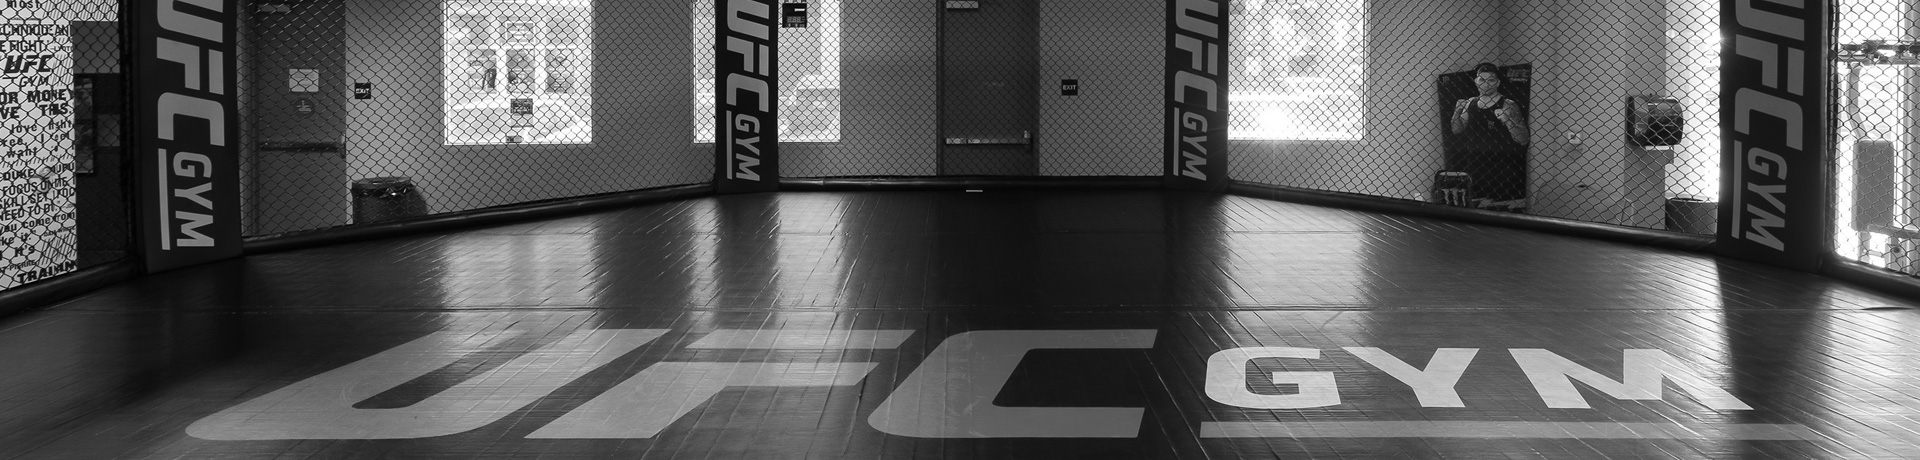 black and white photo of UFC Gym boxing ring